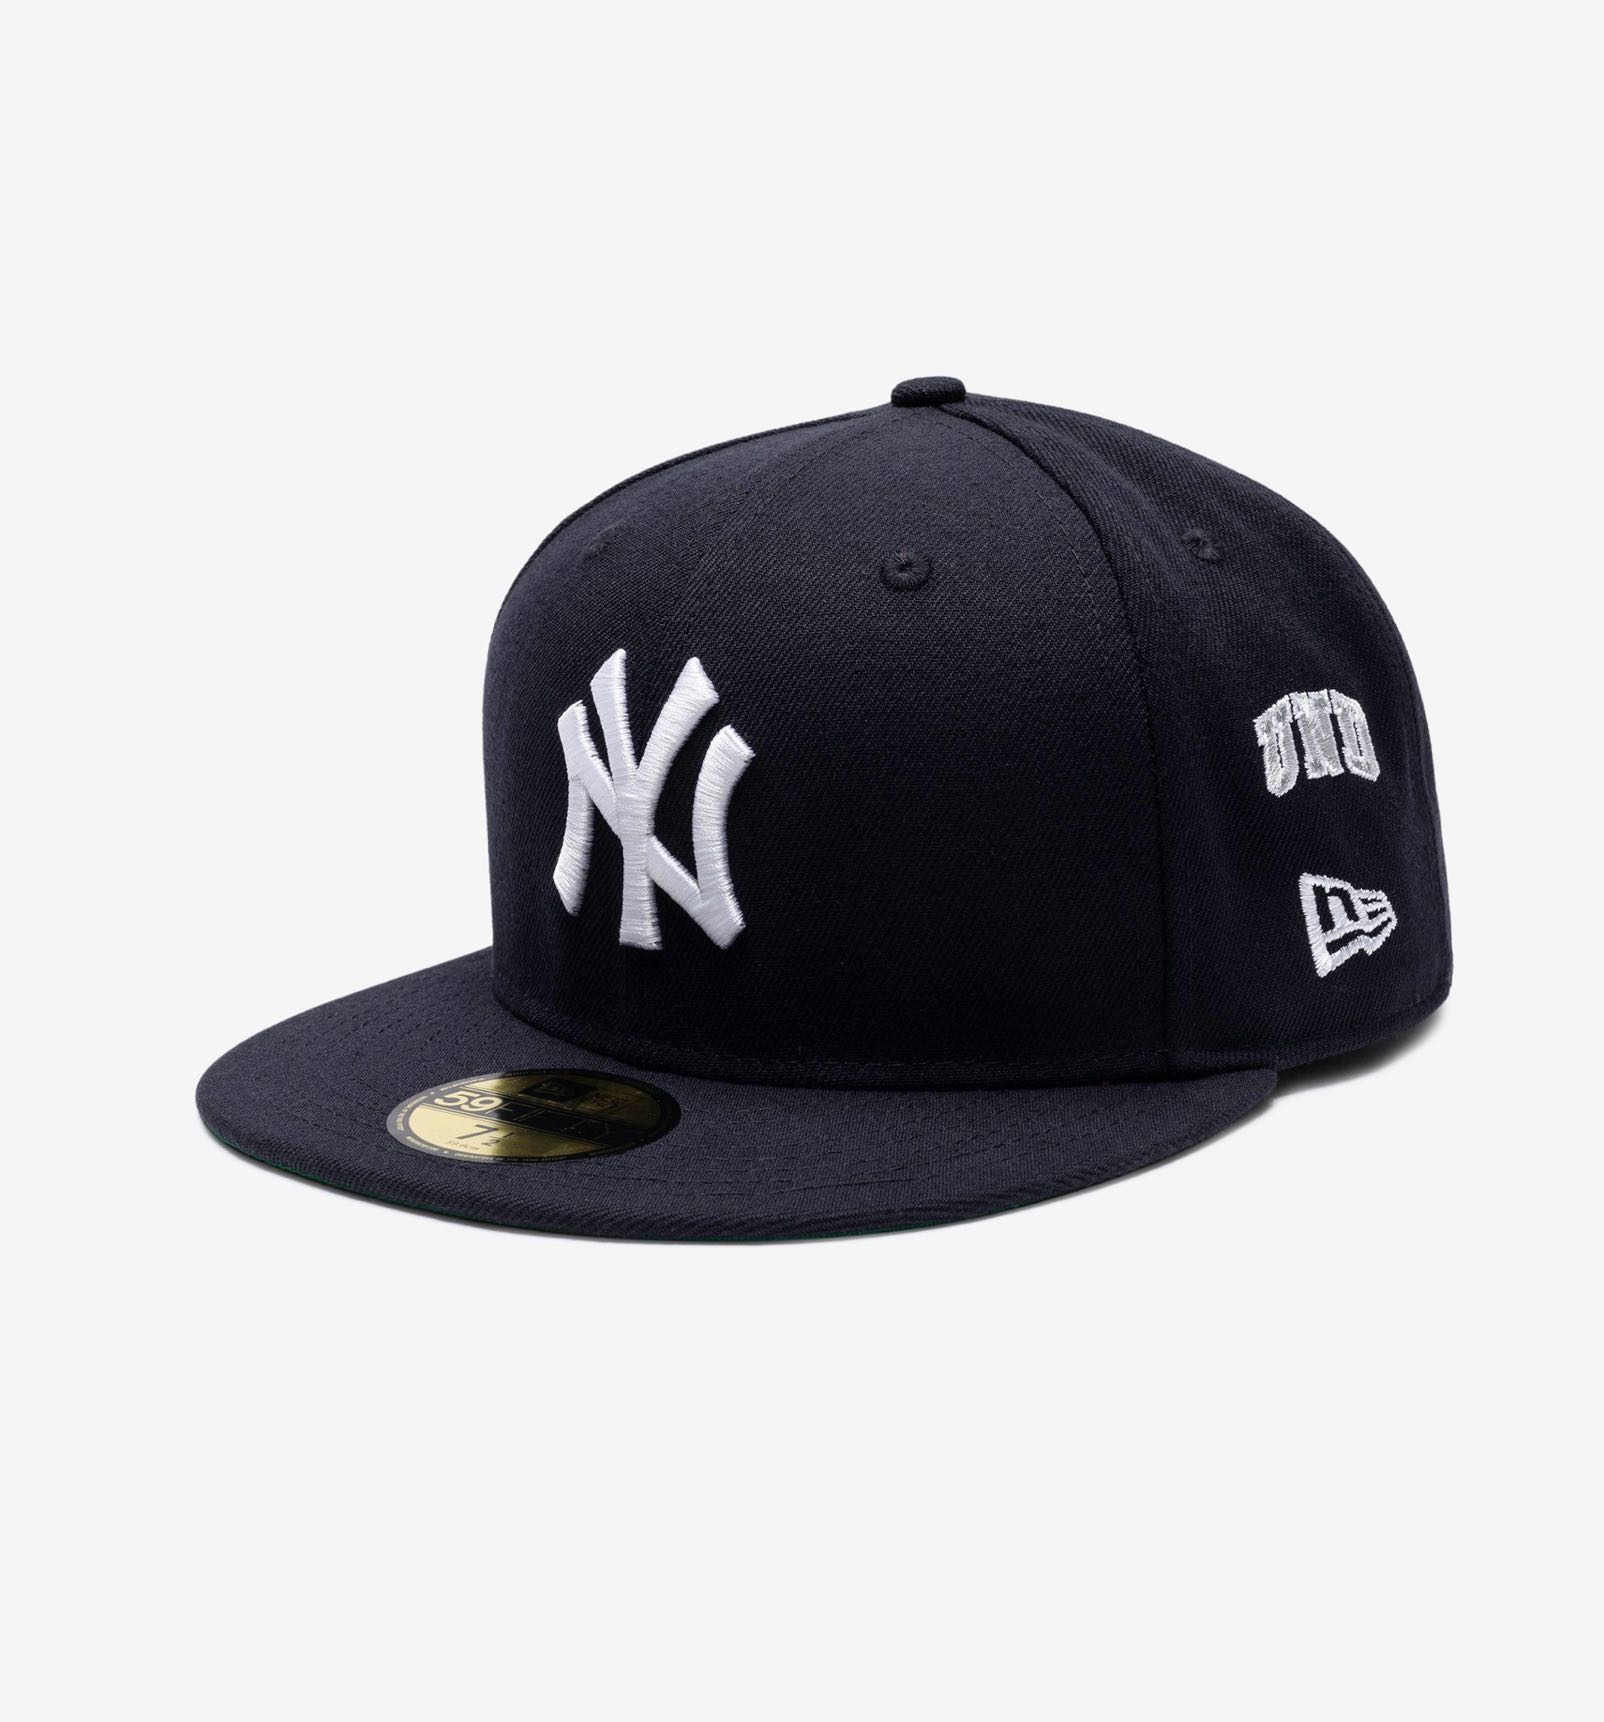 UNDEFEATED x NEW ERA x MLB Fitted NEW YORK YANKEES CAP, Men's 